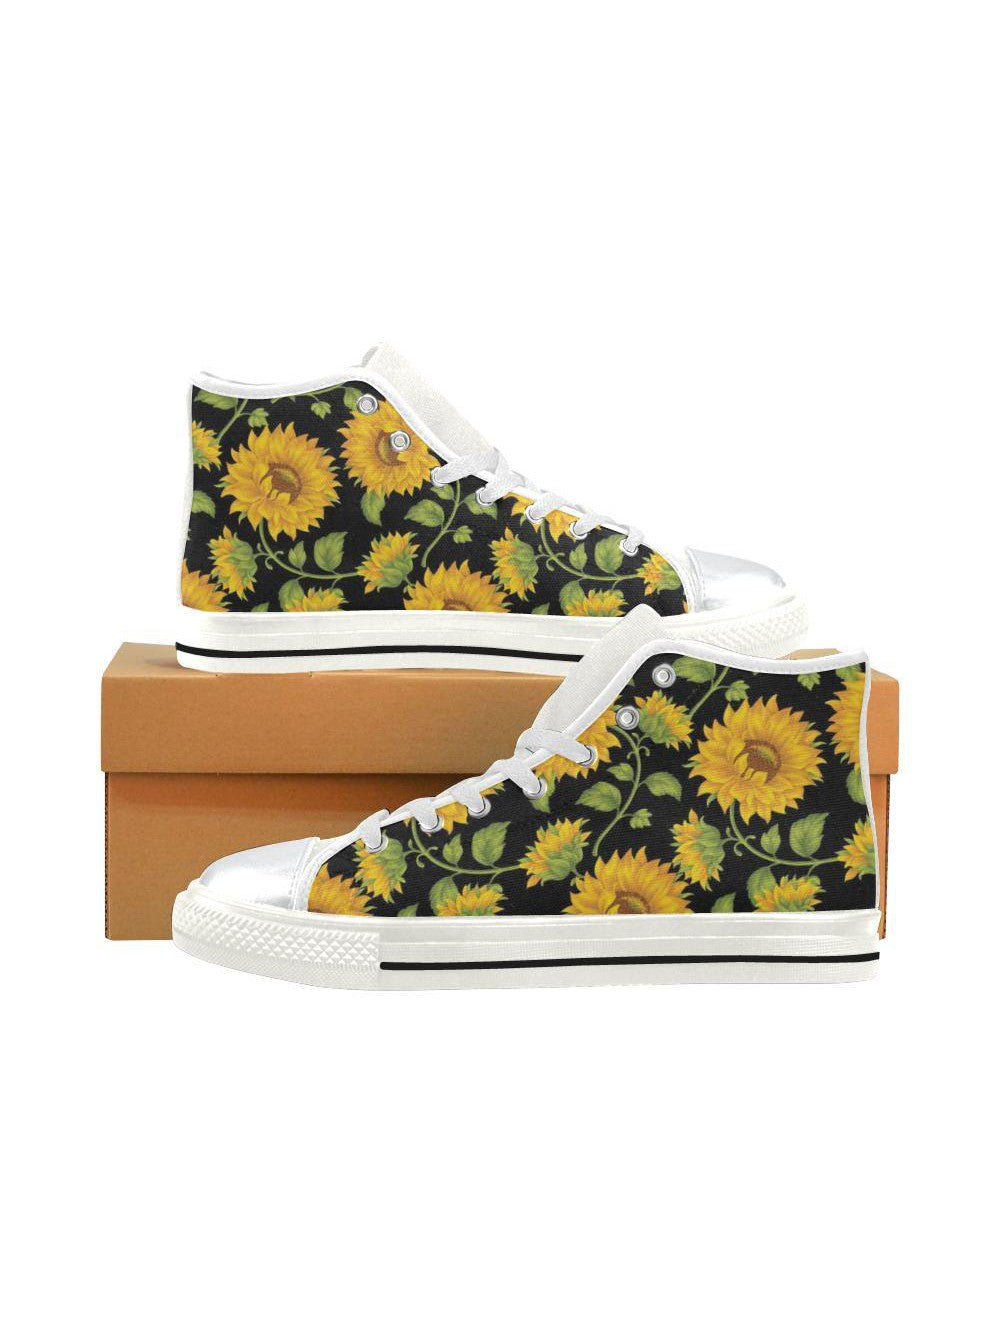 SUNFLOWERS BLACK High Top Canvas Kid's Shoes